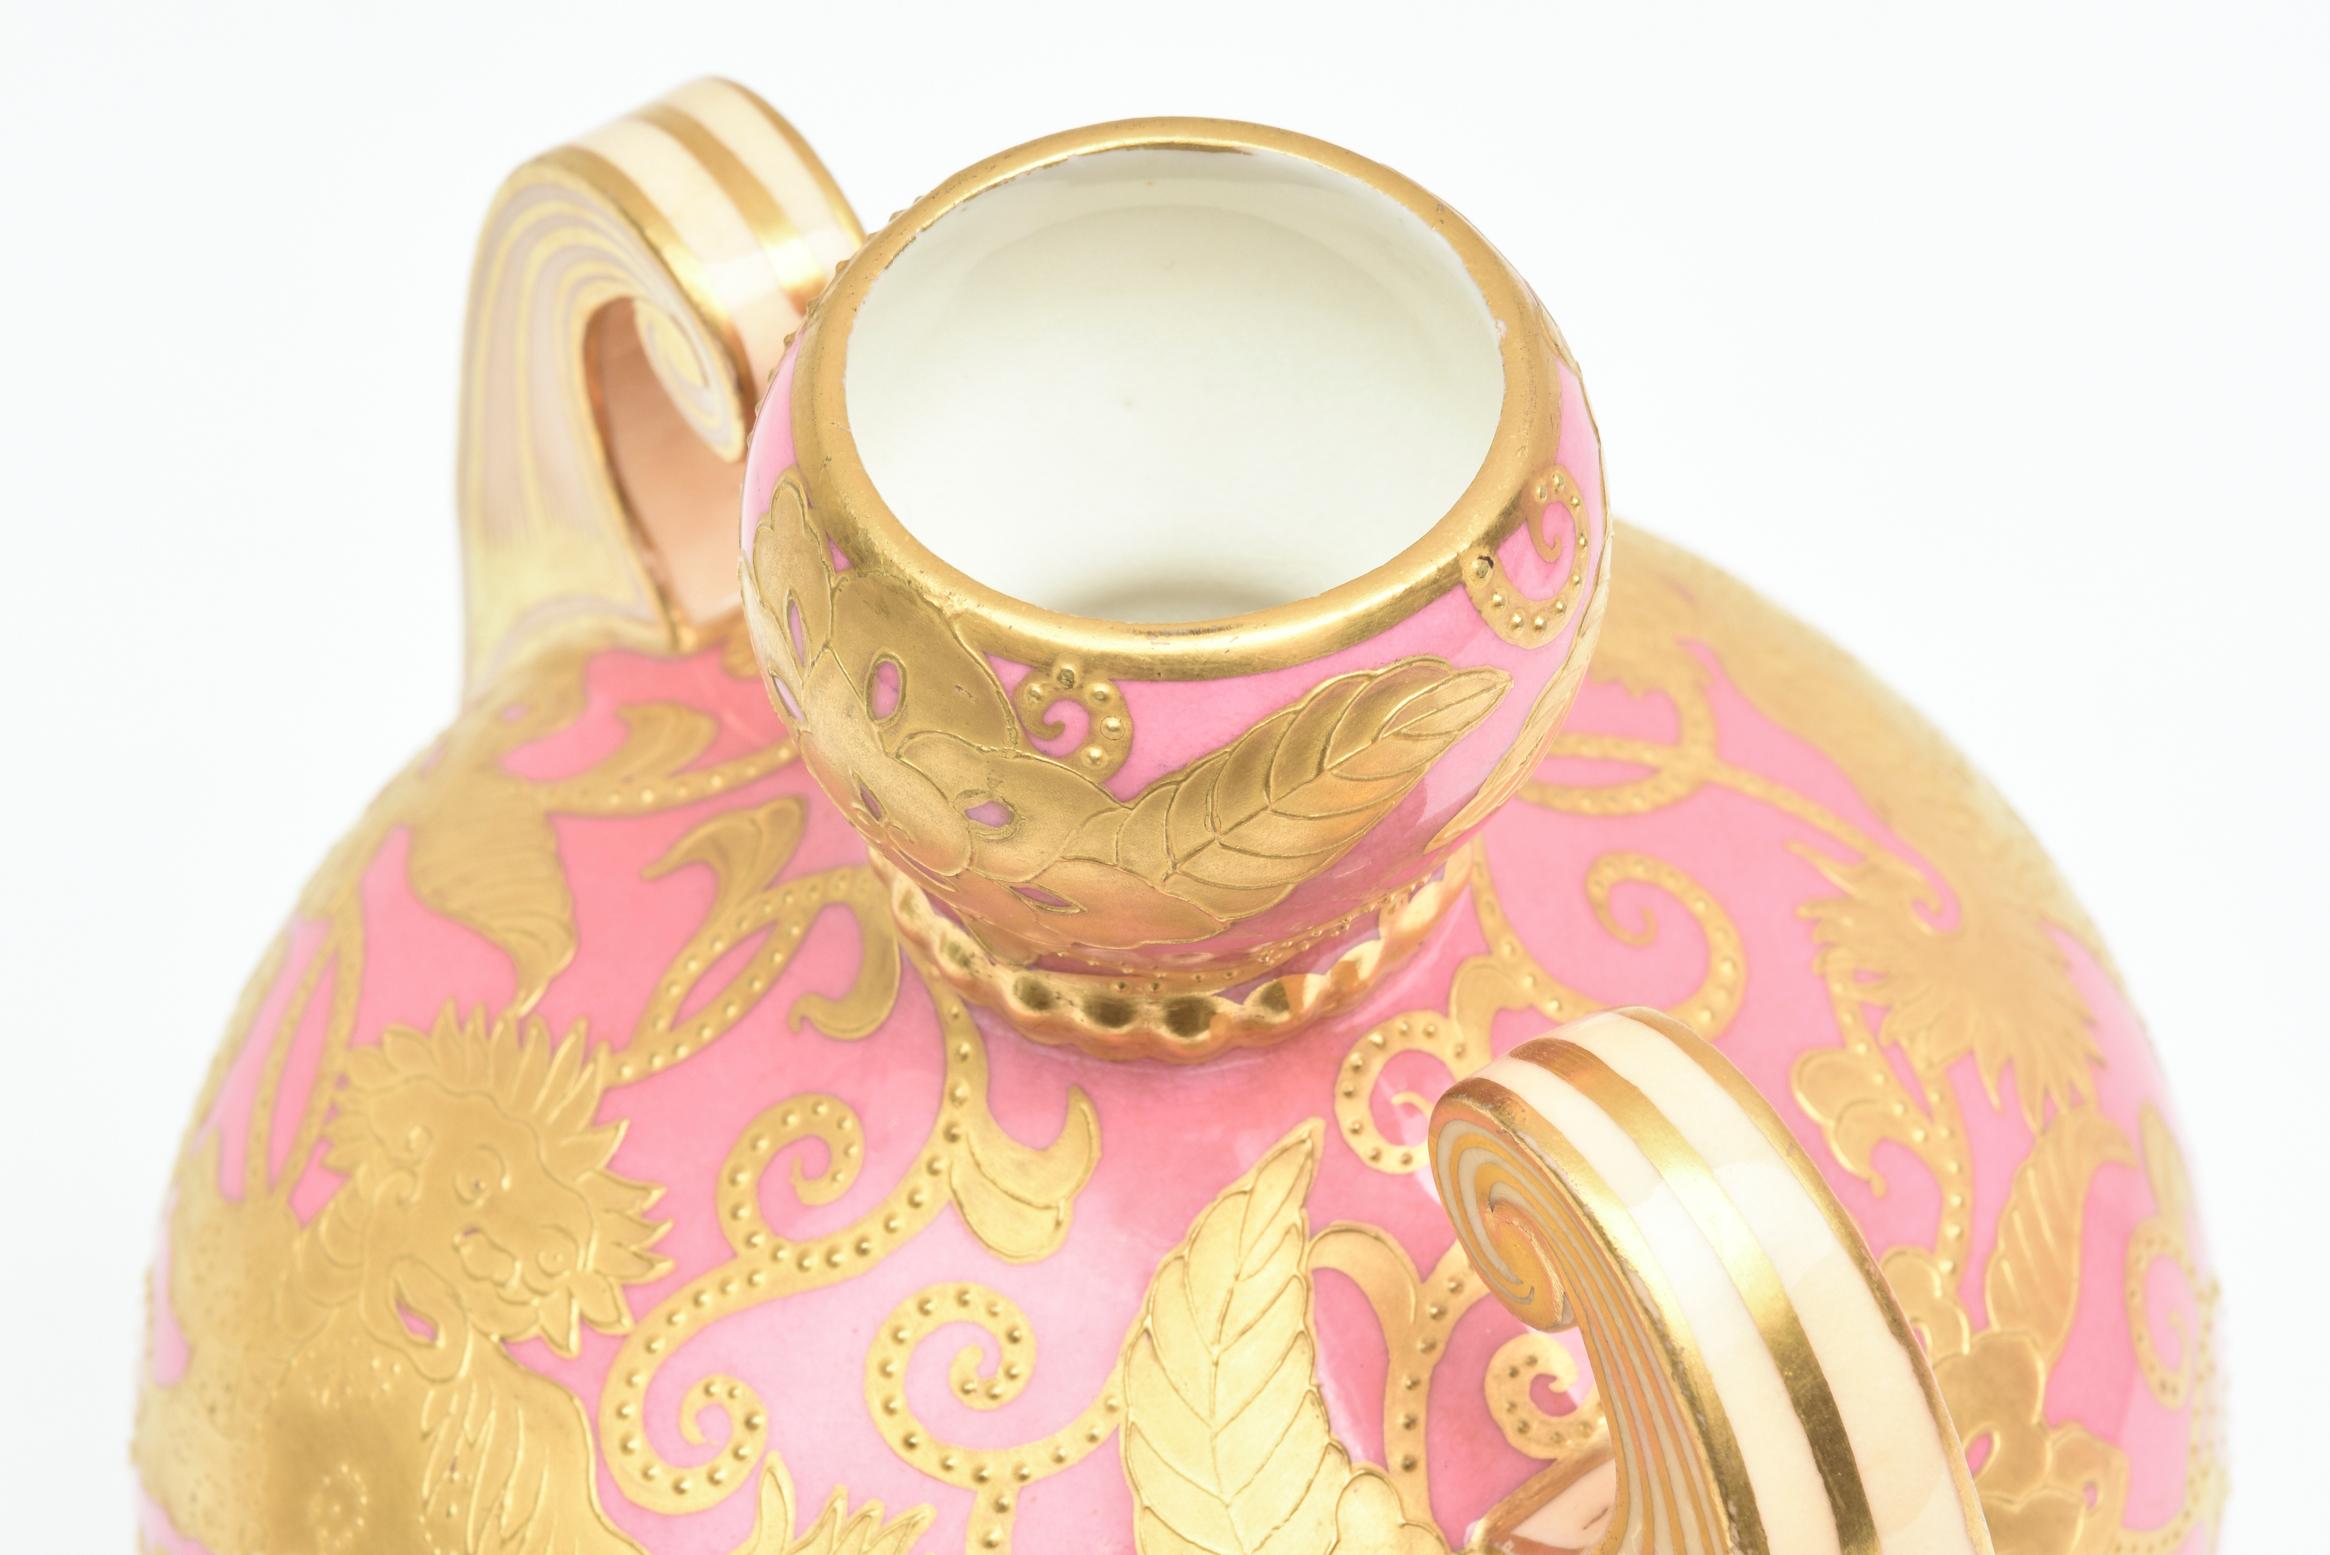 Hand-Crafted Pink & Gold Encrusted Vase, Foo Dog Design with Elaborate Handles